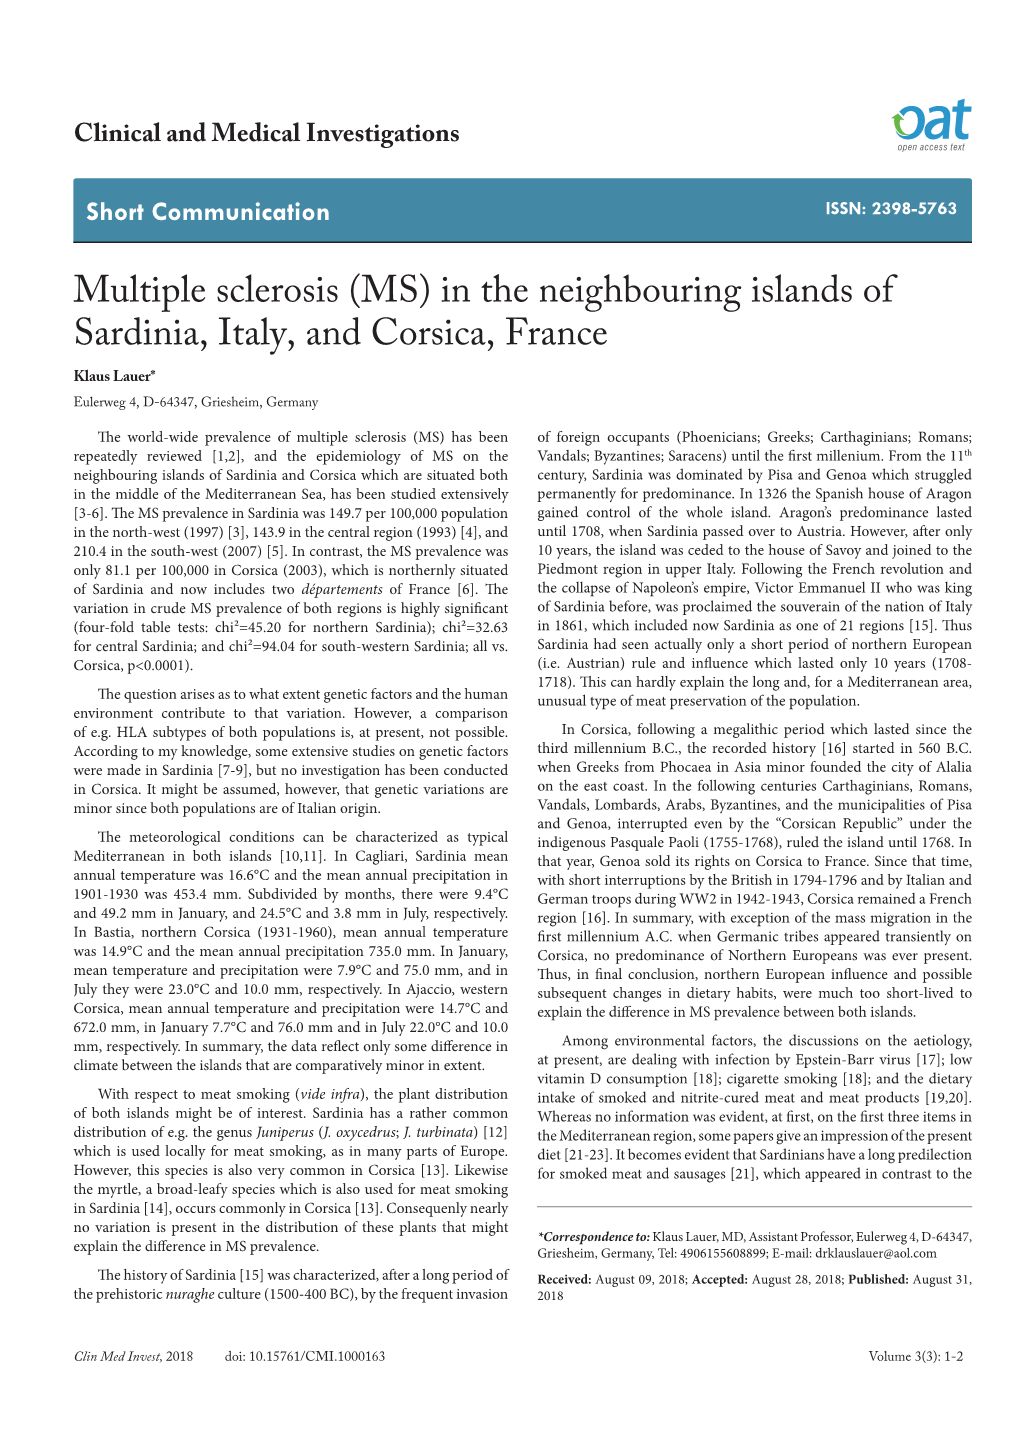 Multiple Sclerosis (MS) in the Neighbouring Islands of Sardinia, Italy, and Corsica, France